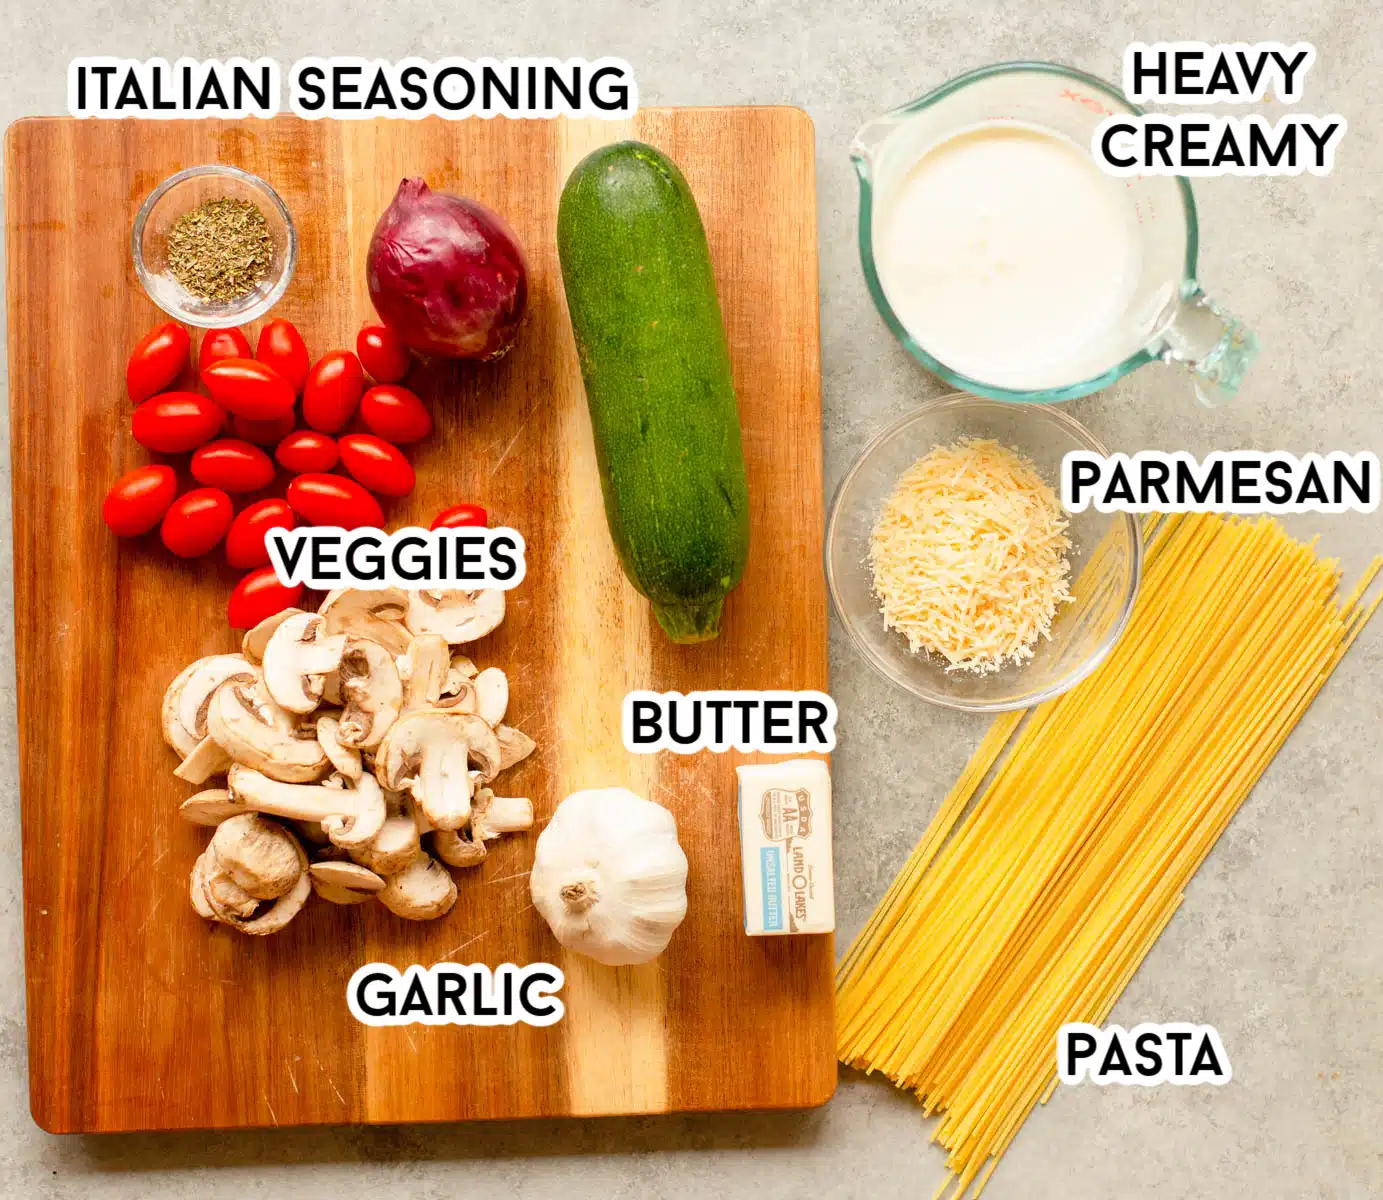 Ingredients in Creamy Vegetable Pasta including mushrooms, zucchini, onion, tomatoes, garlic, Italian seasoning, butter, Parmesan cheese, heavy creamy, and spaghetti noodles. 